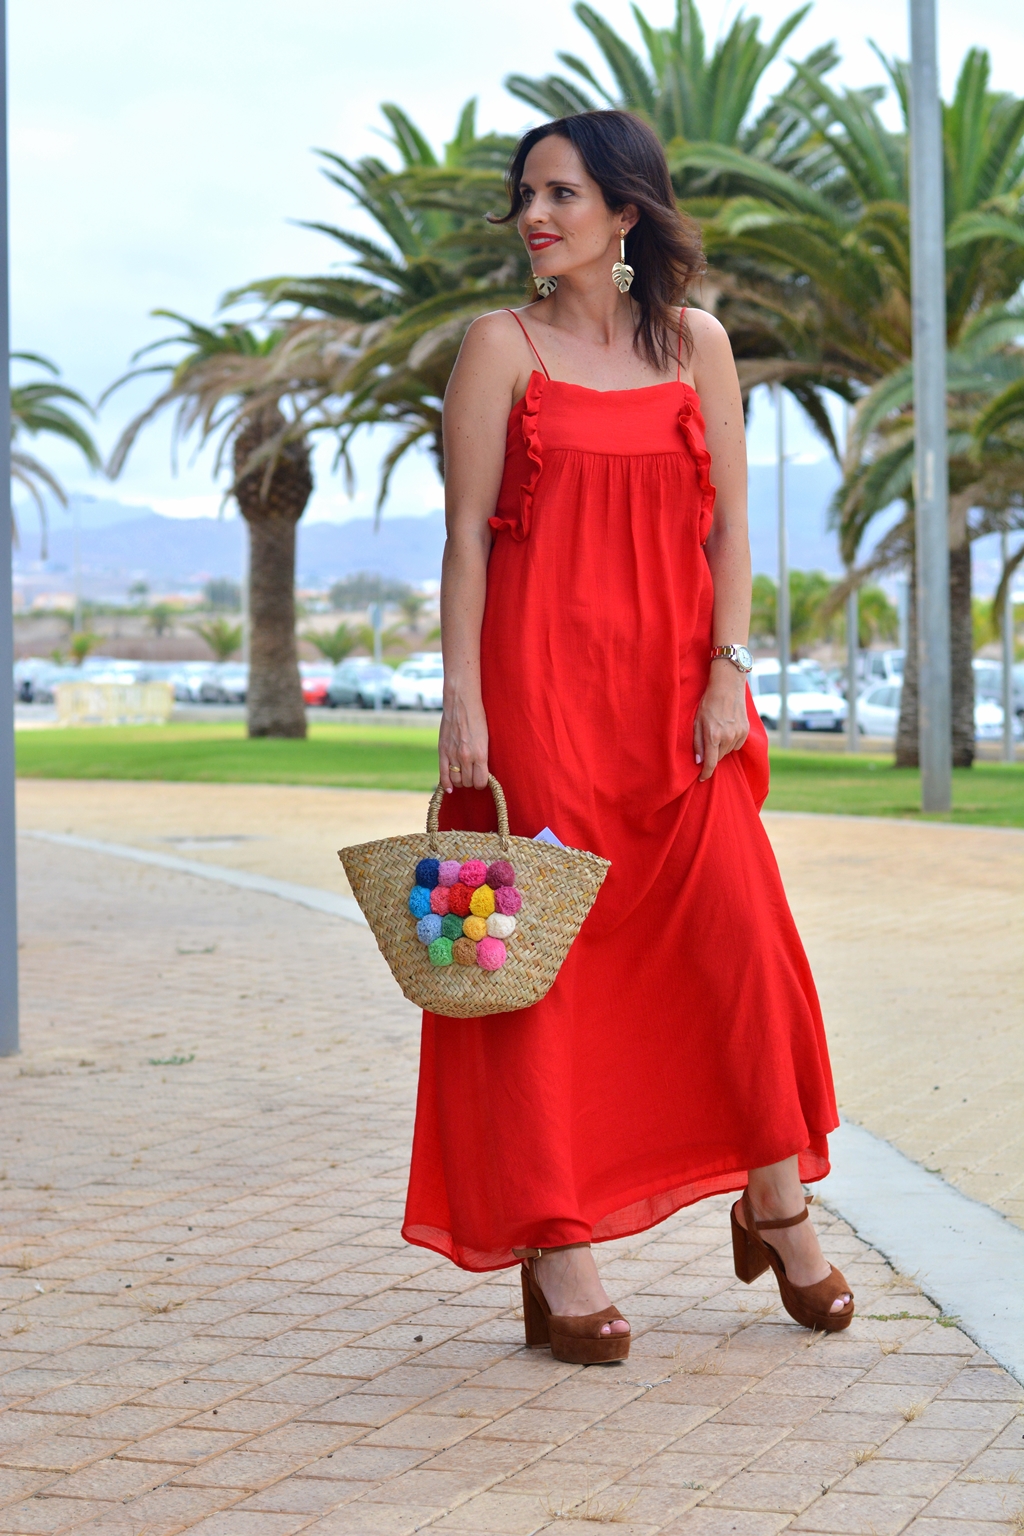 zara-red-dress-outfit-streetstyle-daily-looks